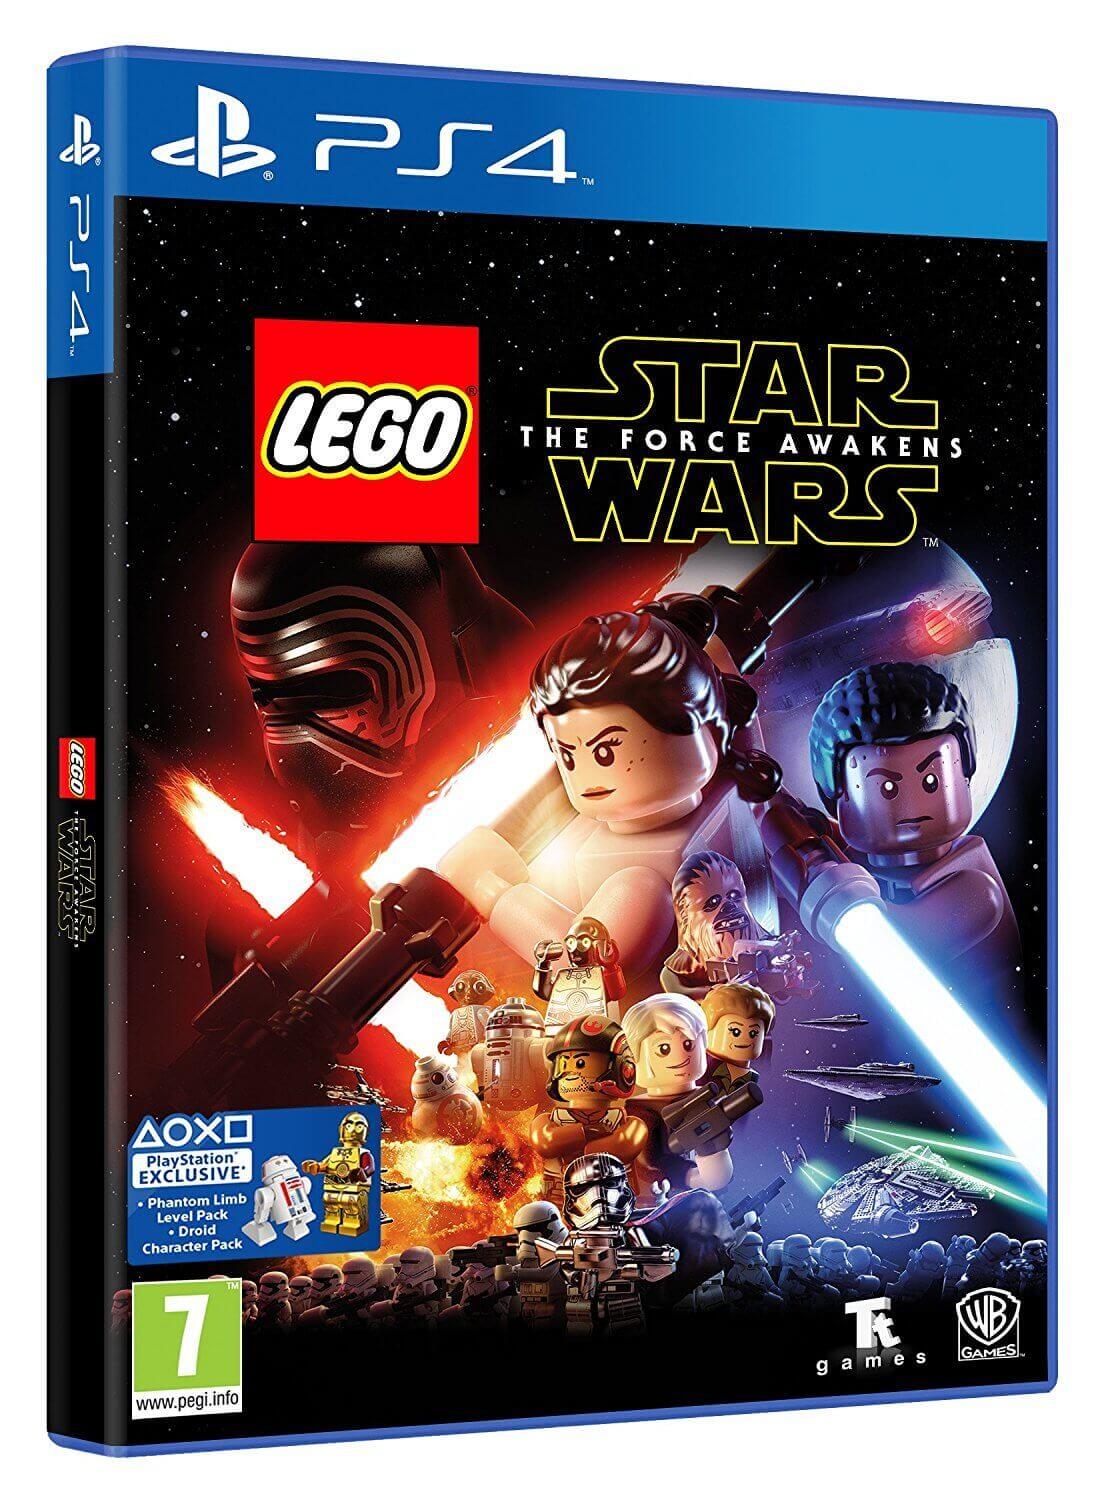 Lego Star Wars: The Force Awakens PS4 £17.99